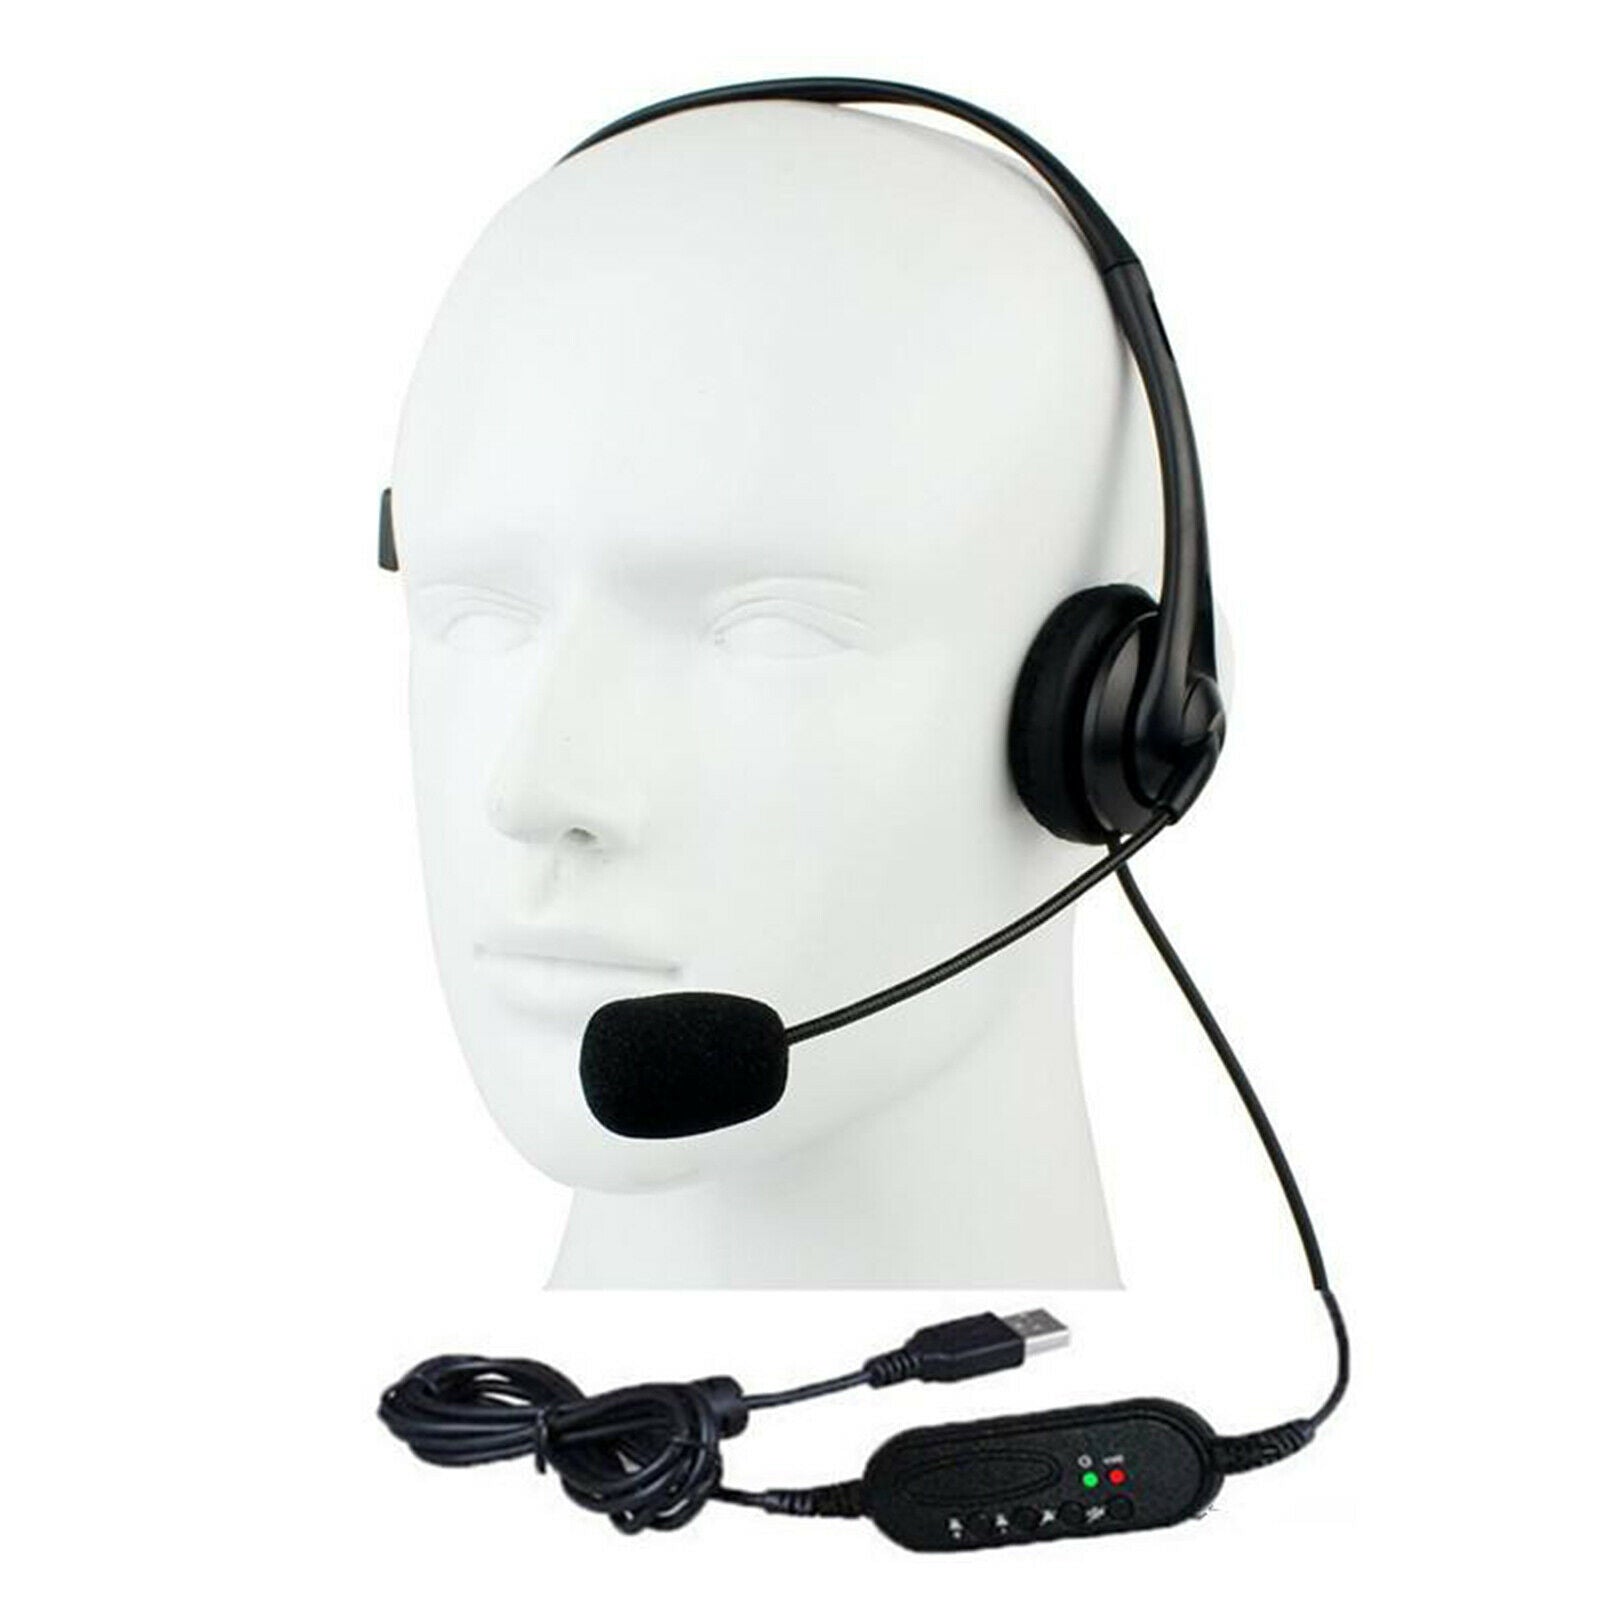 USB Headset with Noise Cancelling Microphone and Adjustable Volume Control for